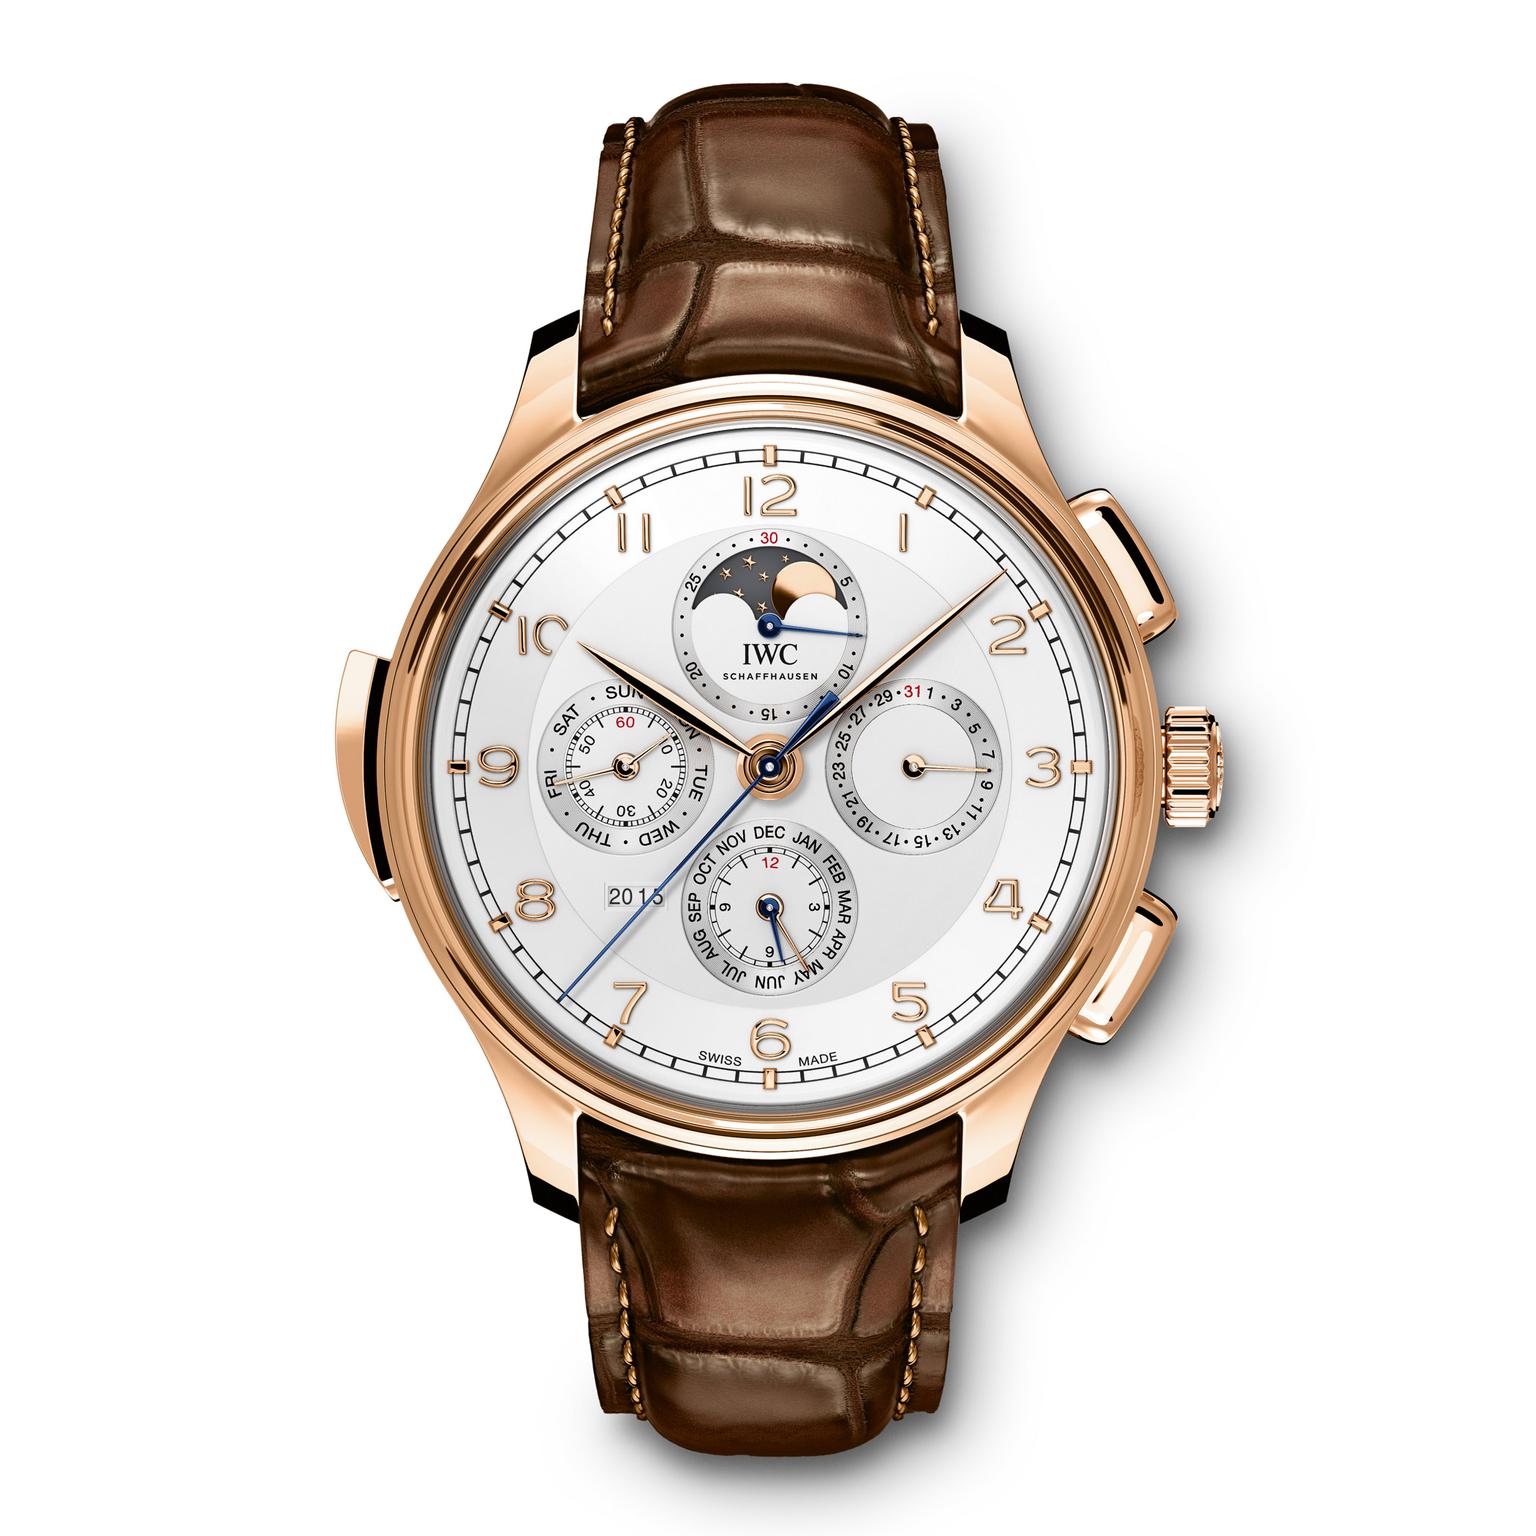 IWC Portugieser Grande Complication Moon rose gold Zoom